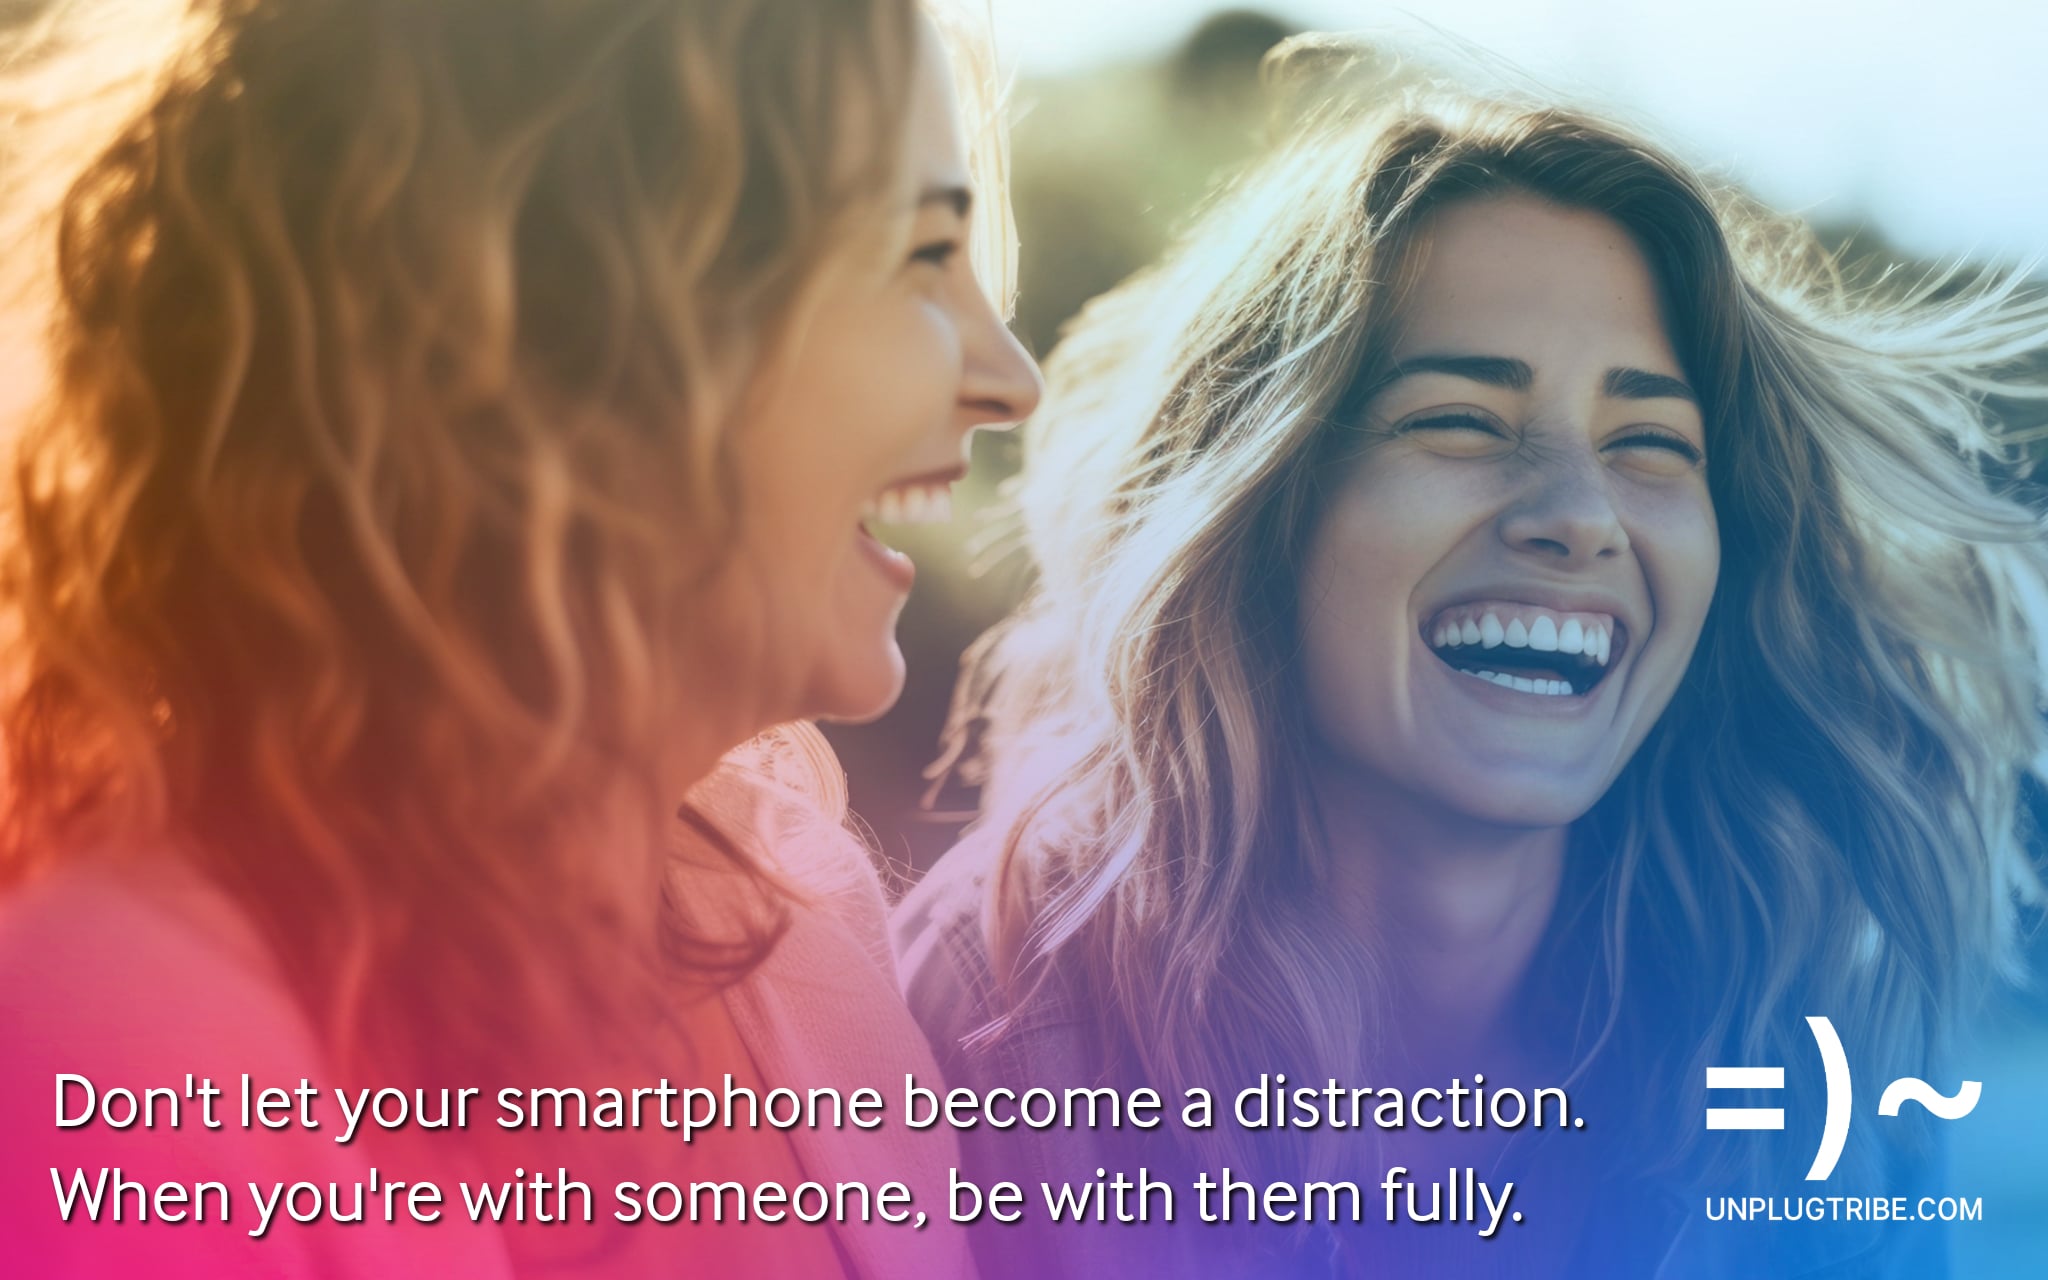 Don’t let your smartphone become a distraction. When you’re with someone, be with them fully.